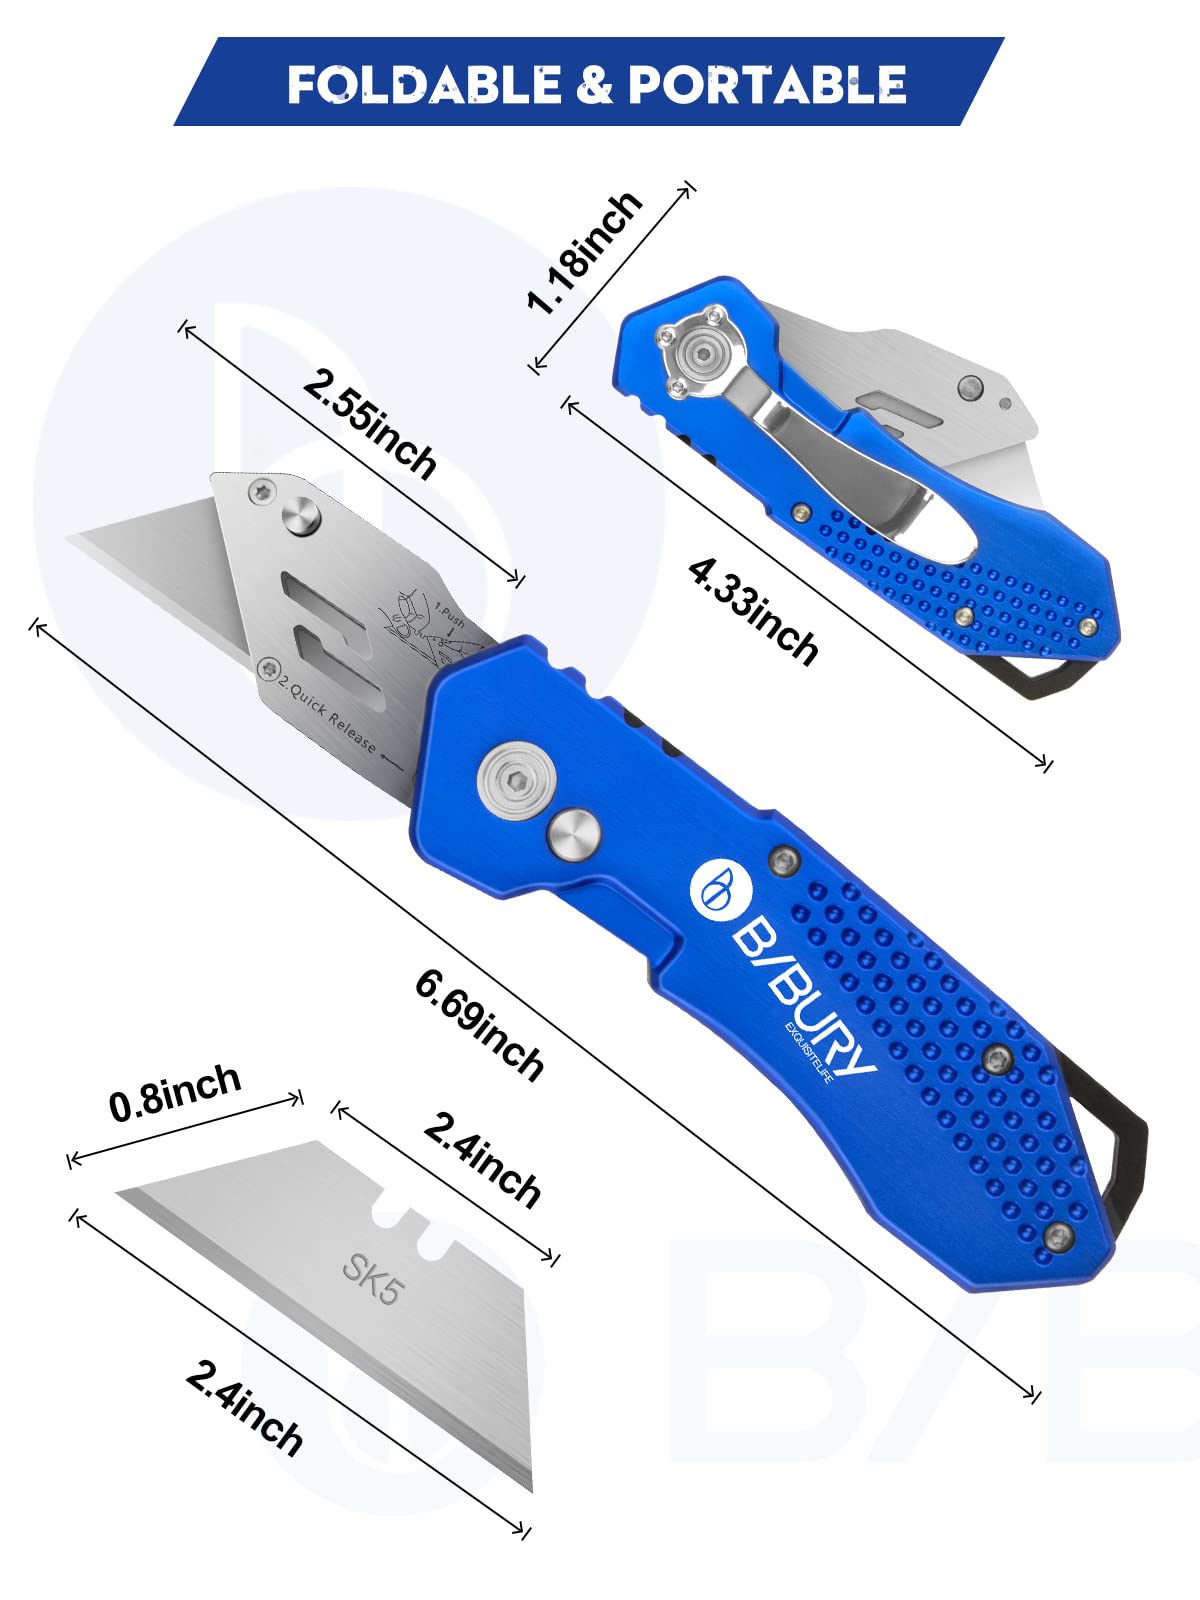 2 Pack BIBURY Utility Knife, Heavy Duty Folding Box Cutter, Pocket Carpet Knife with 20 Extra SK5 Stainless Steel Blades, Easy Release Button, Belt Clip, Quick Change, Blade Storage in Handle Design